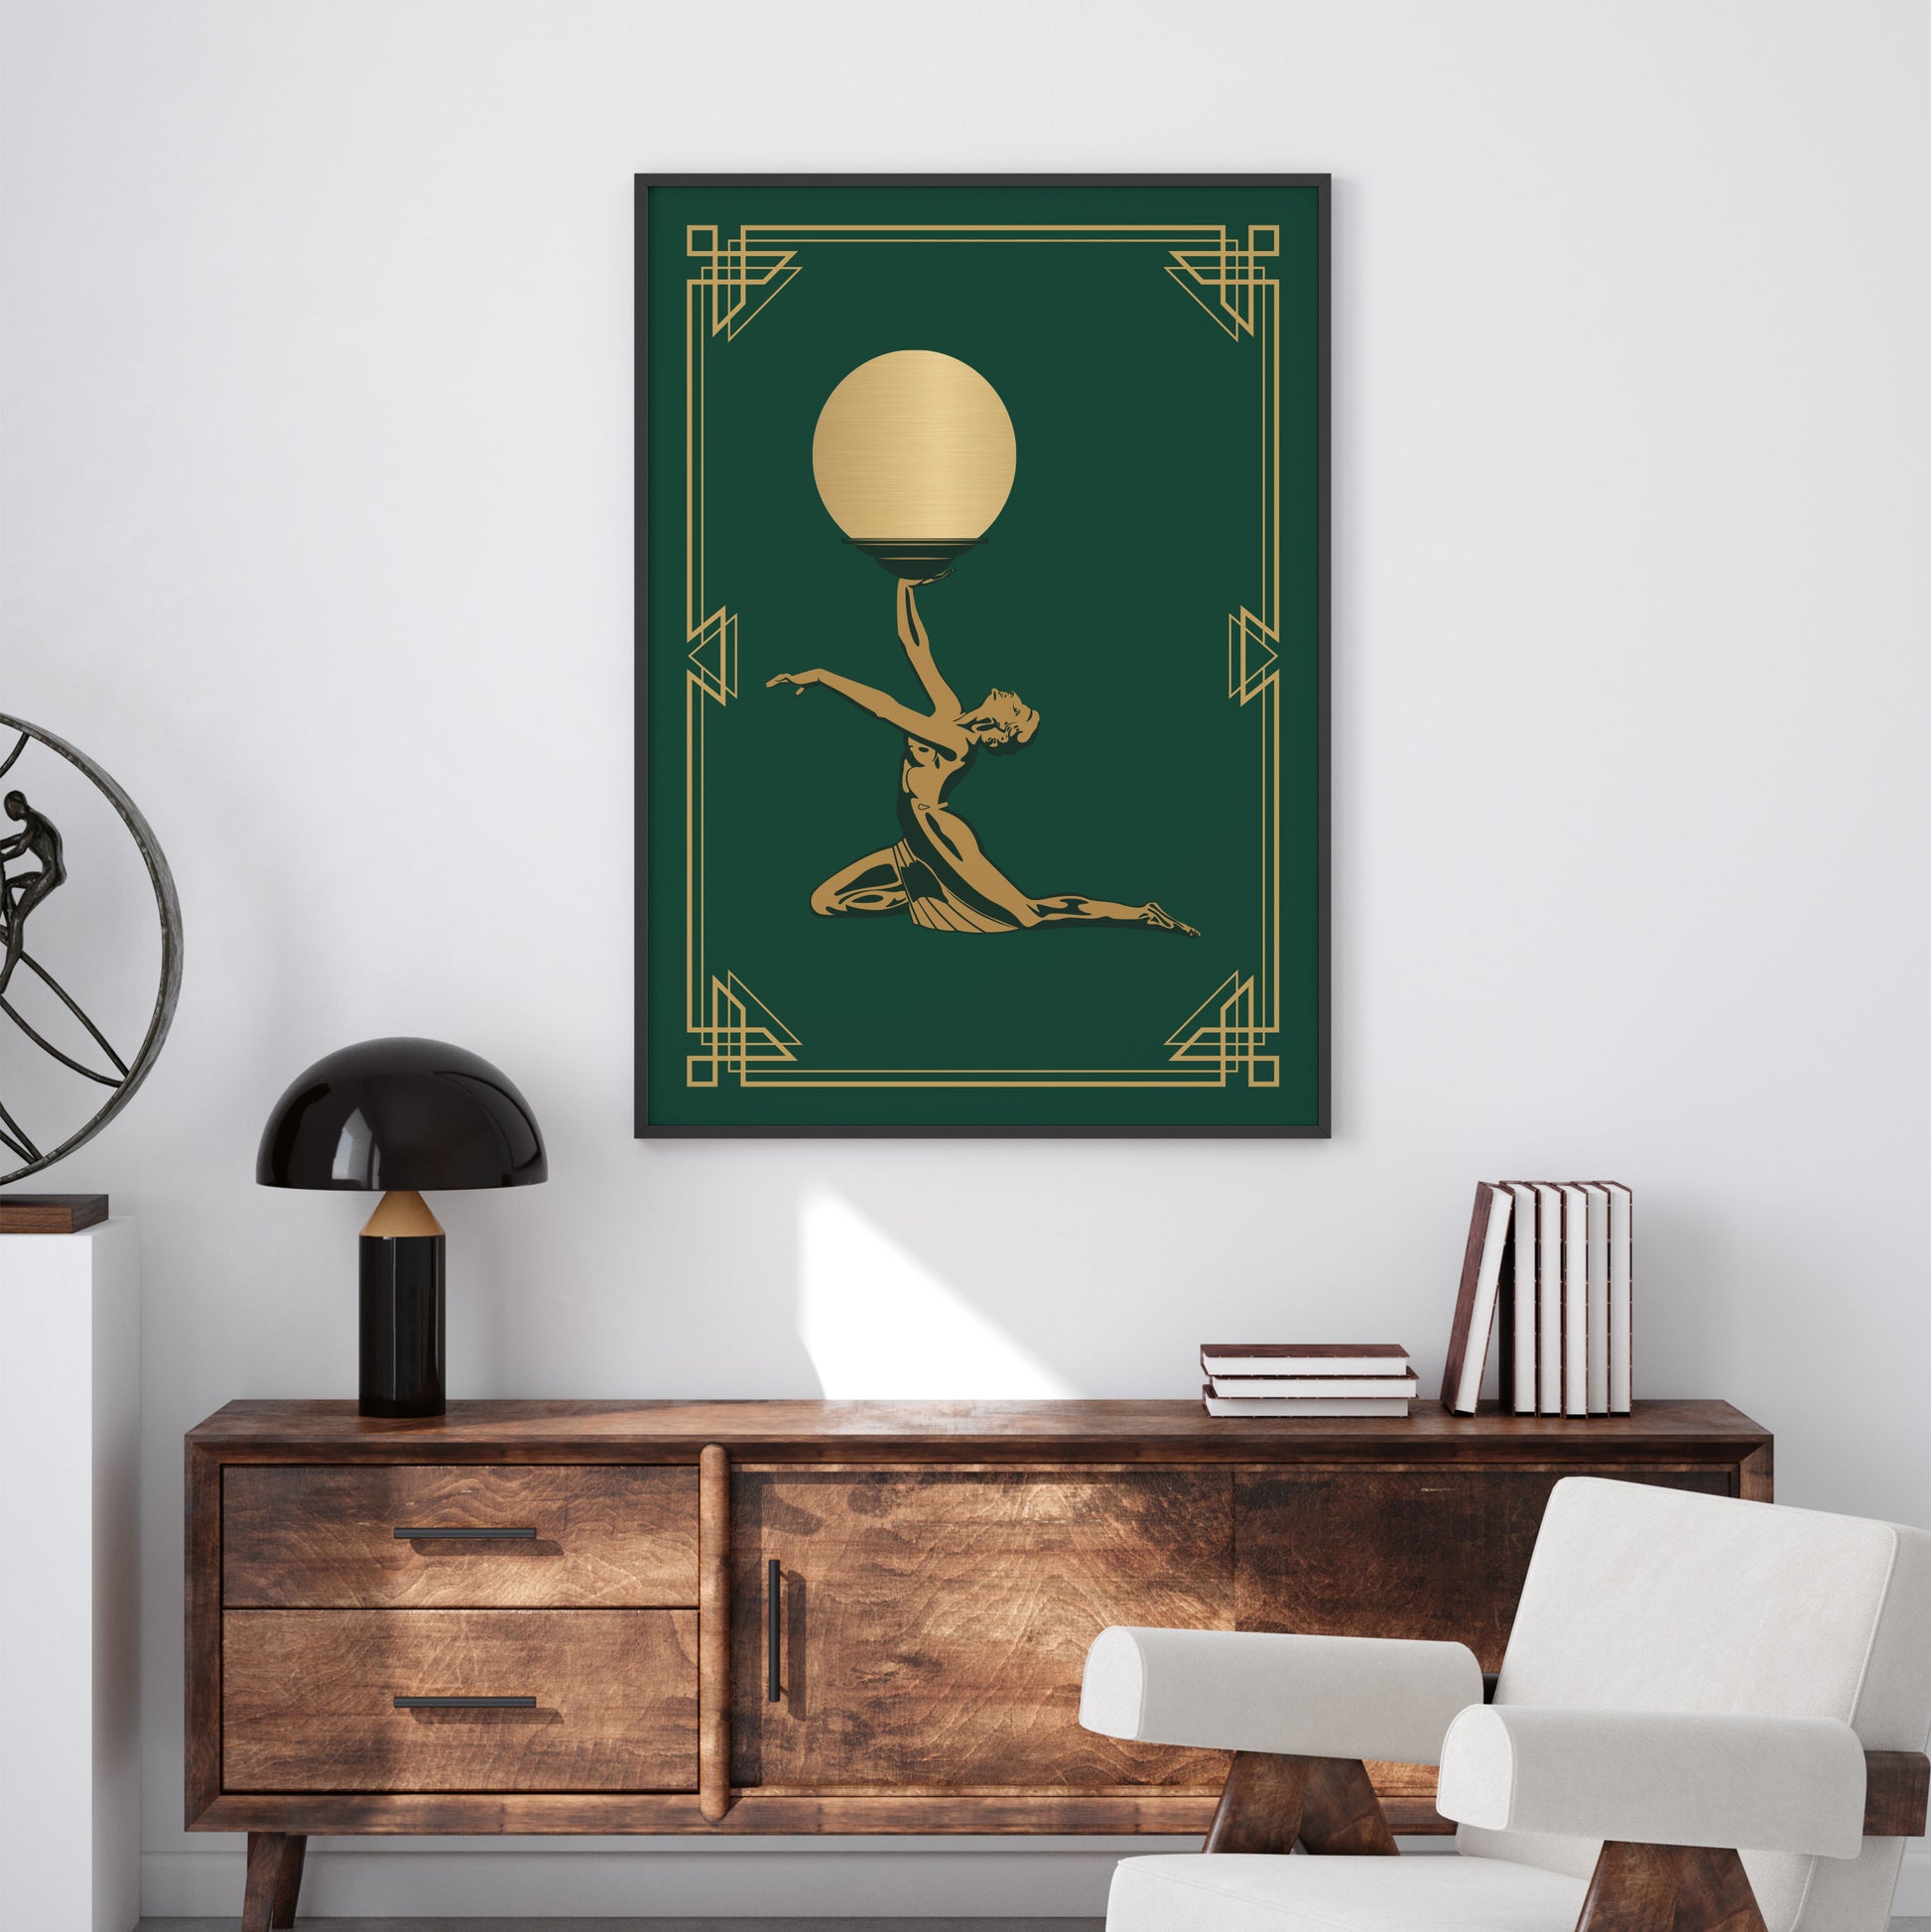 Art deco poster in gold and green